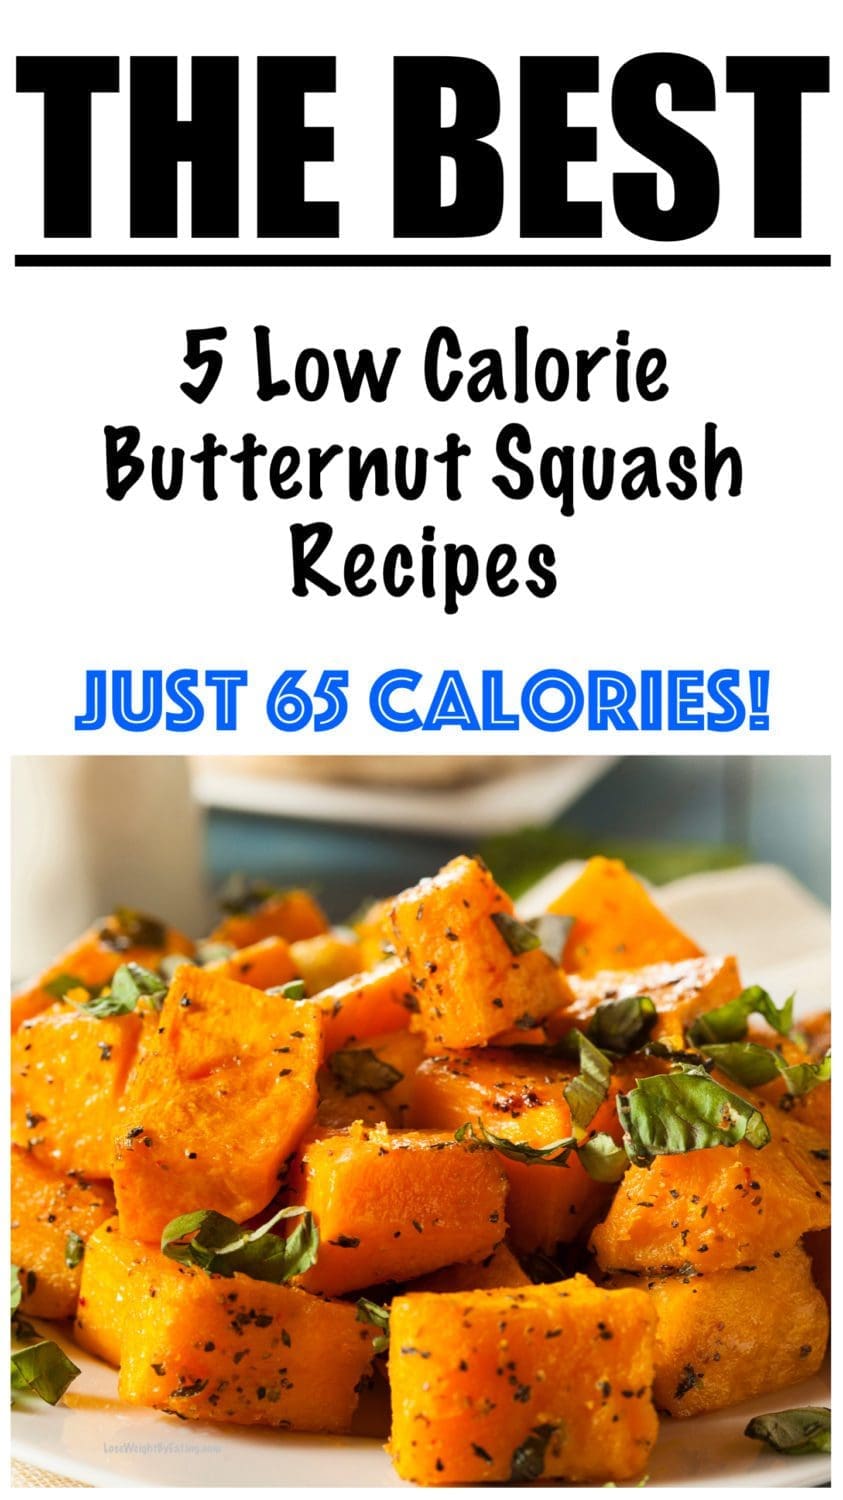 Roasted Butternut Squash Cubes